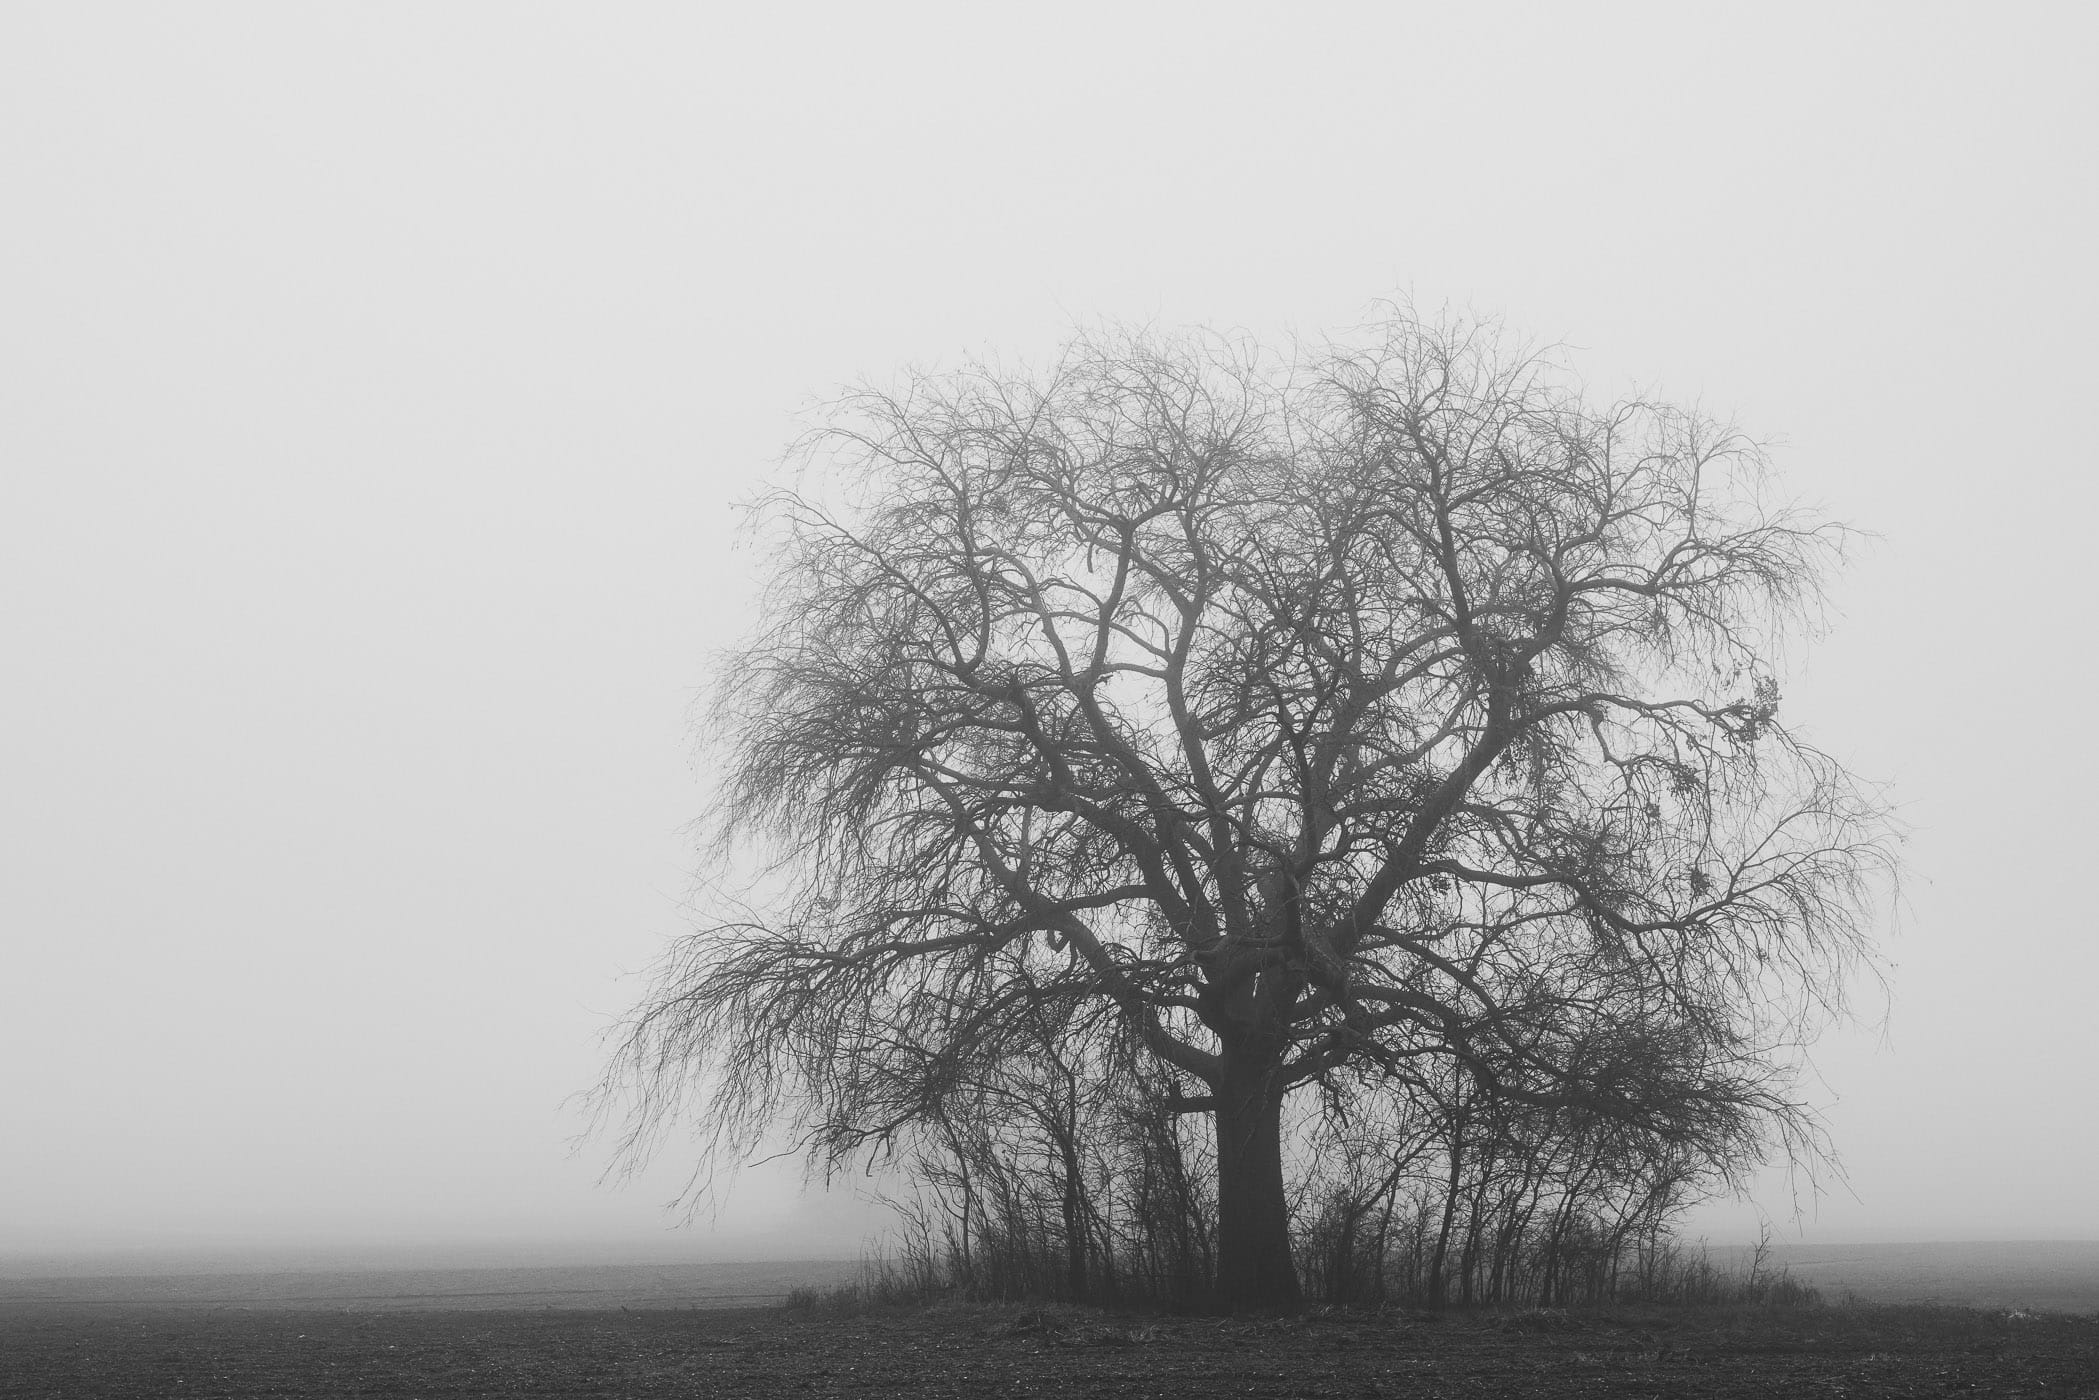 A tree emerges from the morning fog near McKinney, Texas' Erwin Park.